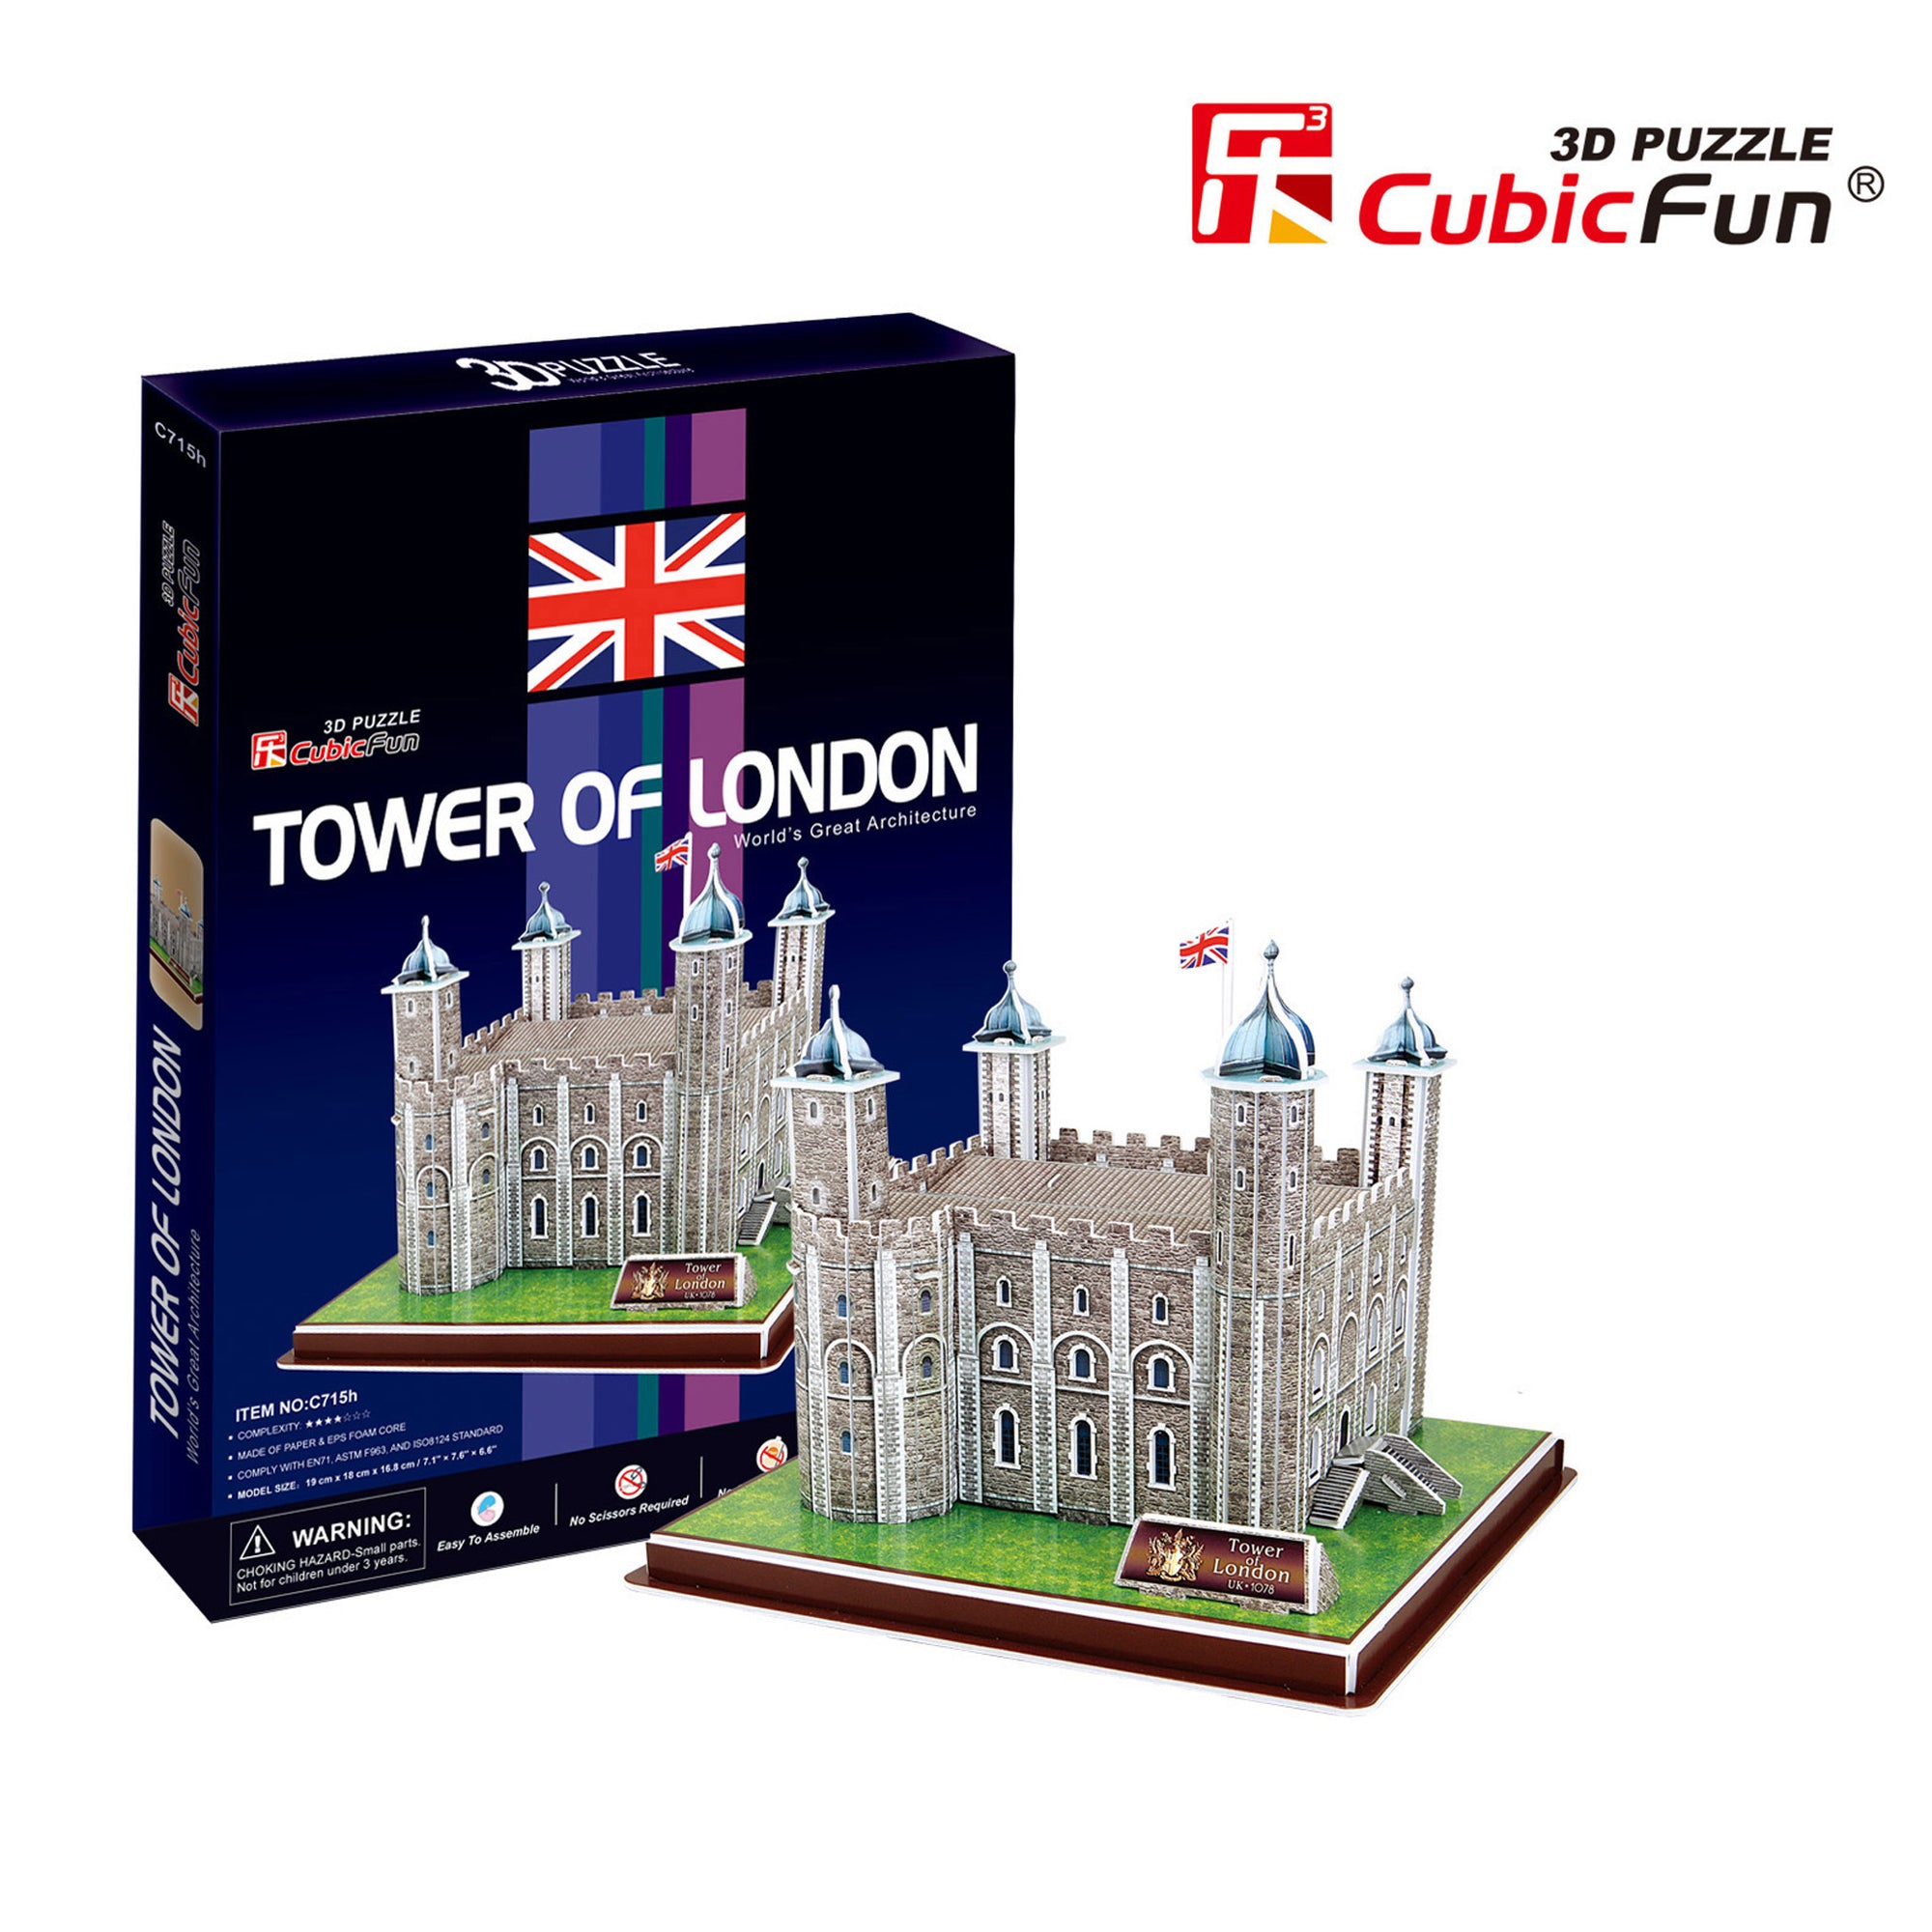 Tower Of London, 40 pc 3D Puzzle